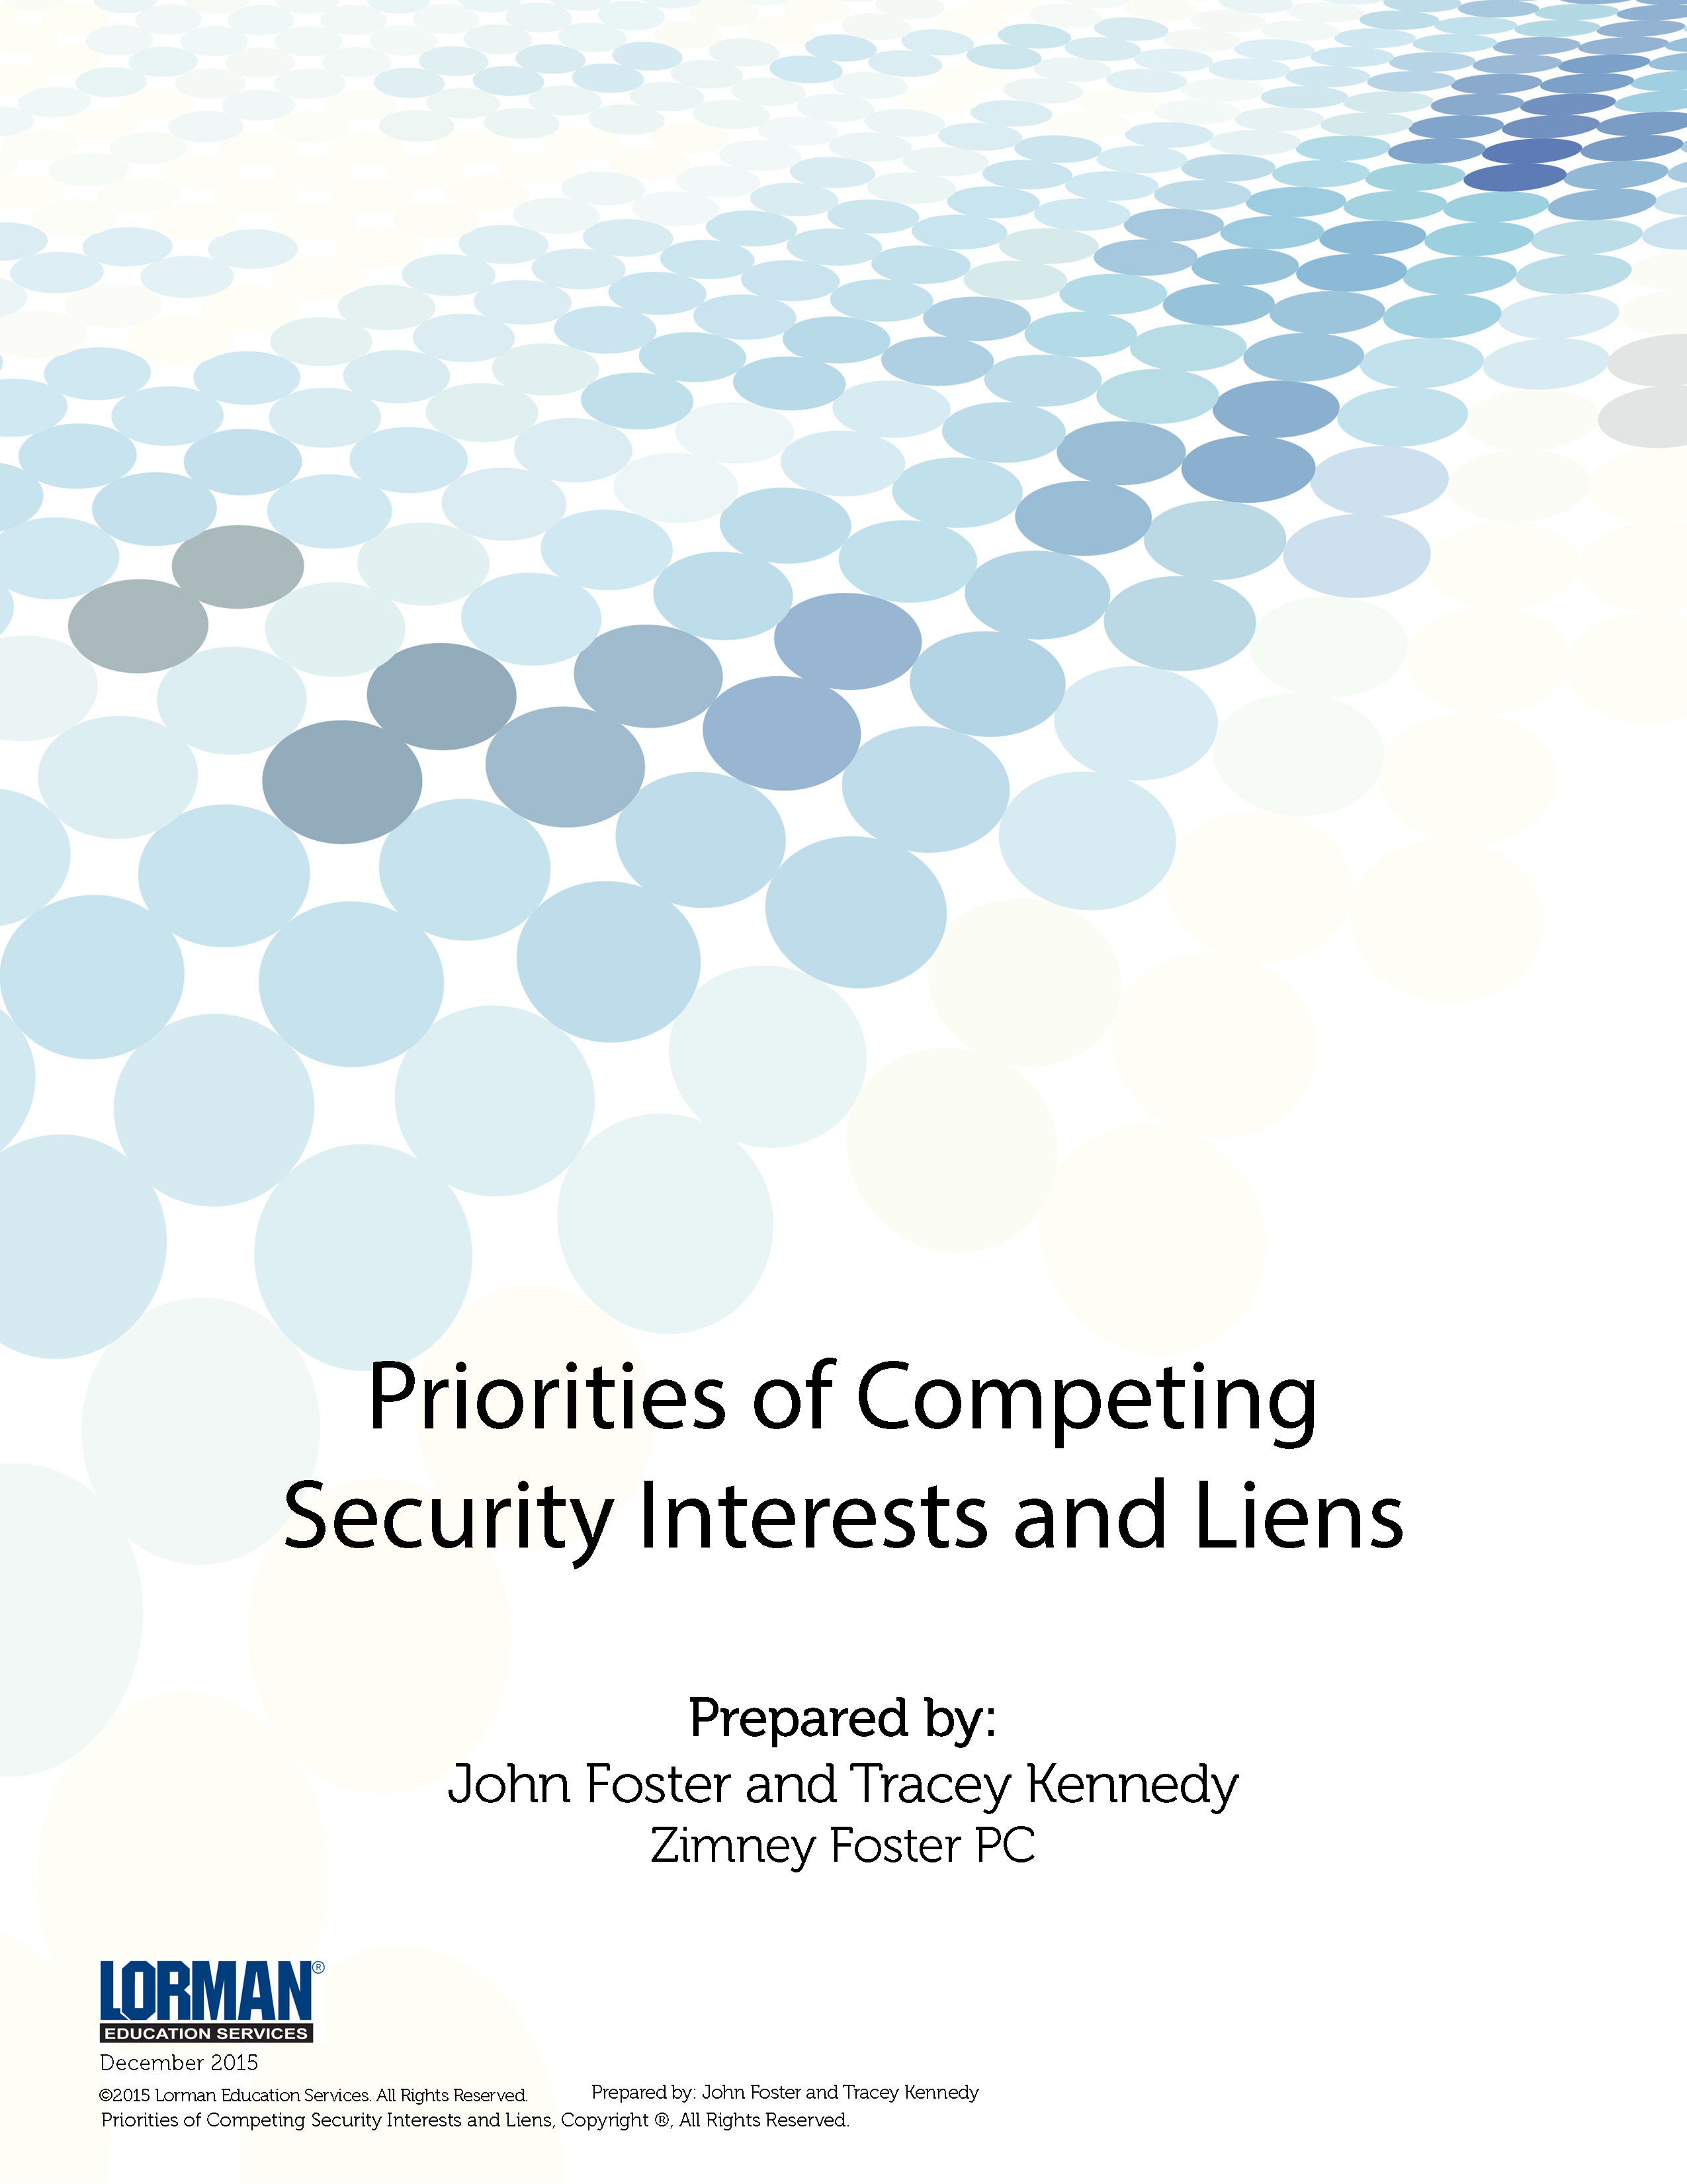 Priorities of Competing Security Interests and Liens